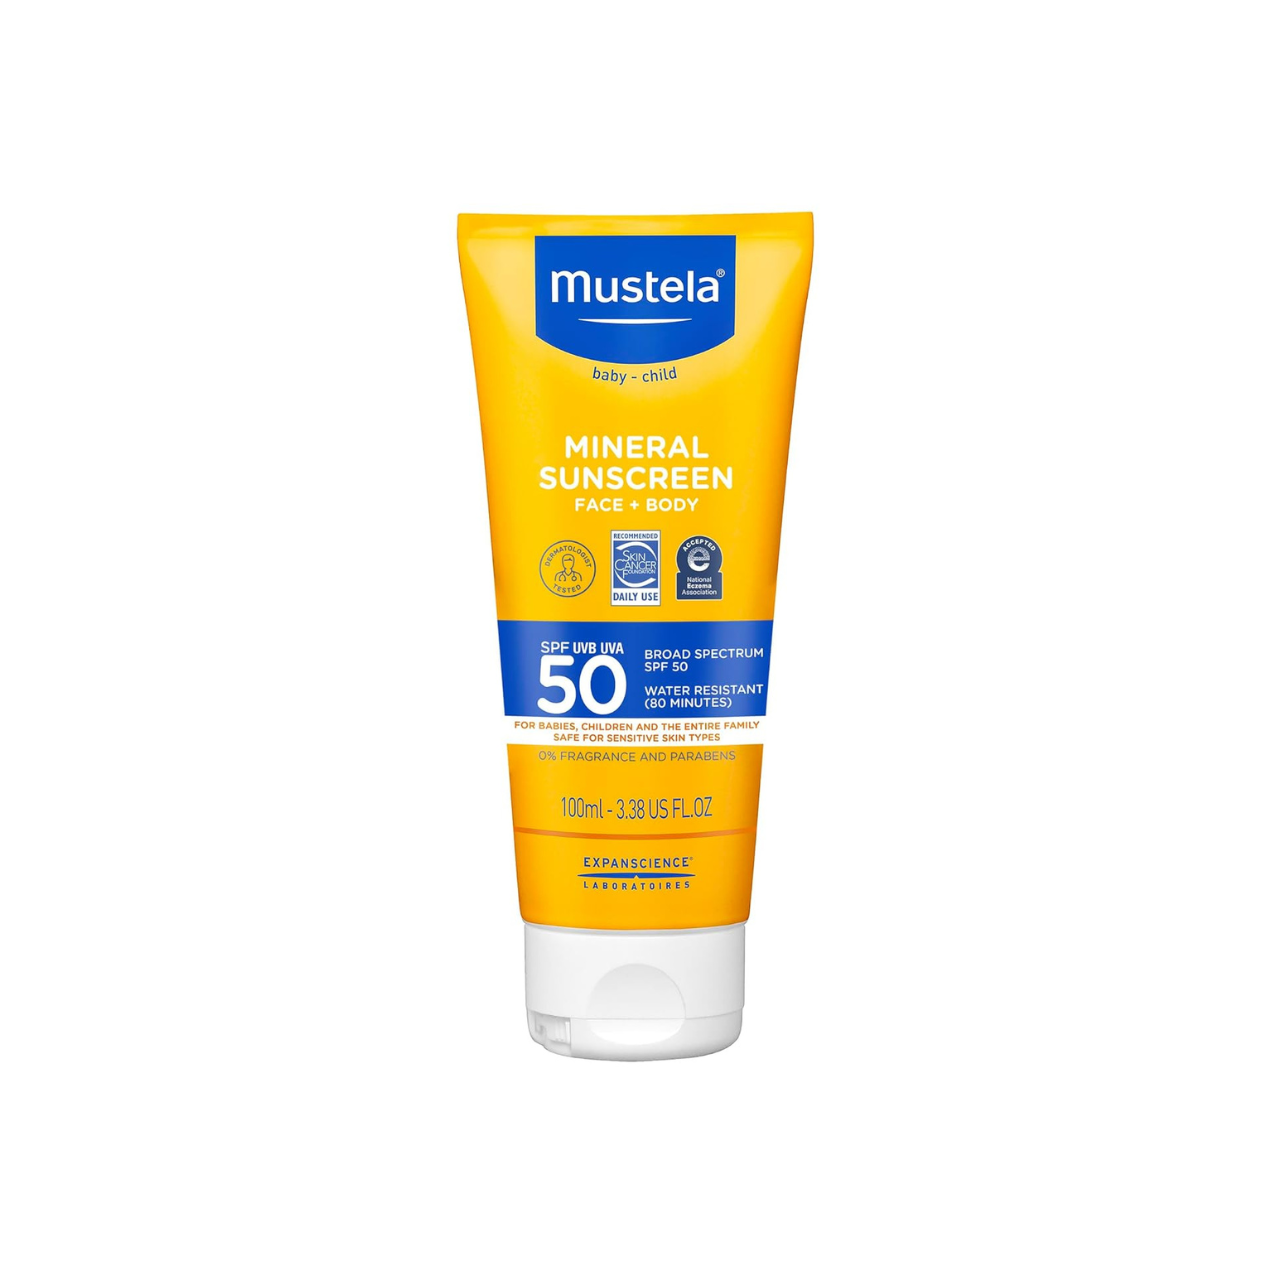 Mustela Baby Mineral Sunscreen Lotion, SPF 50